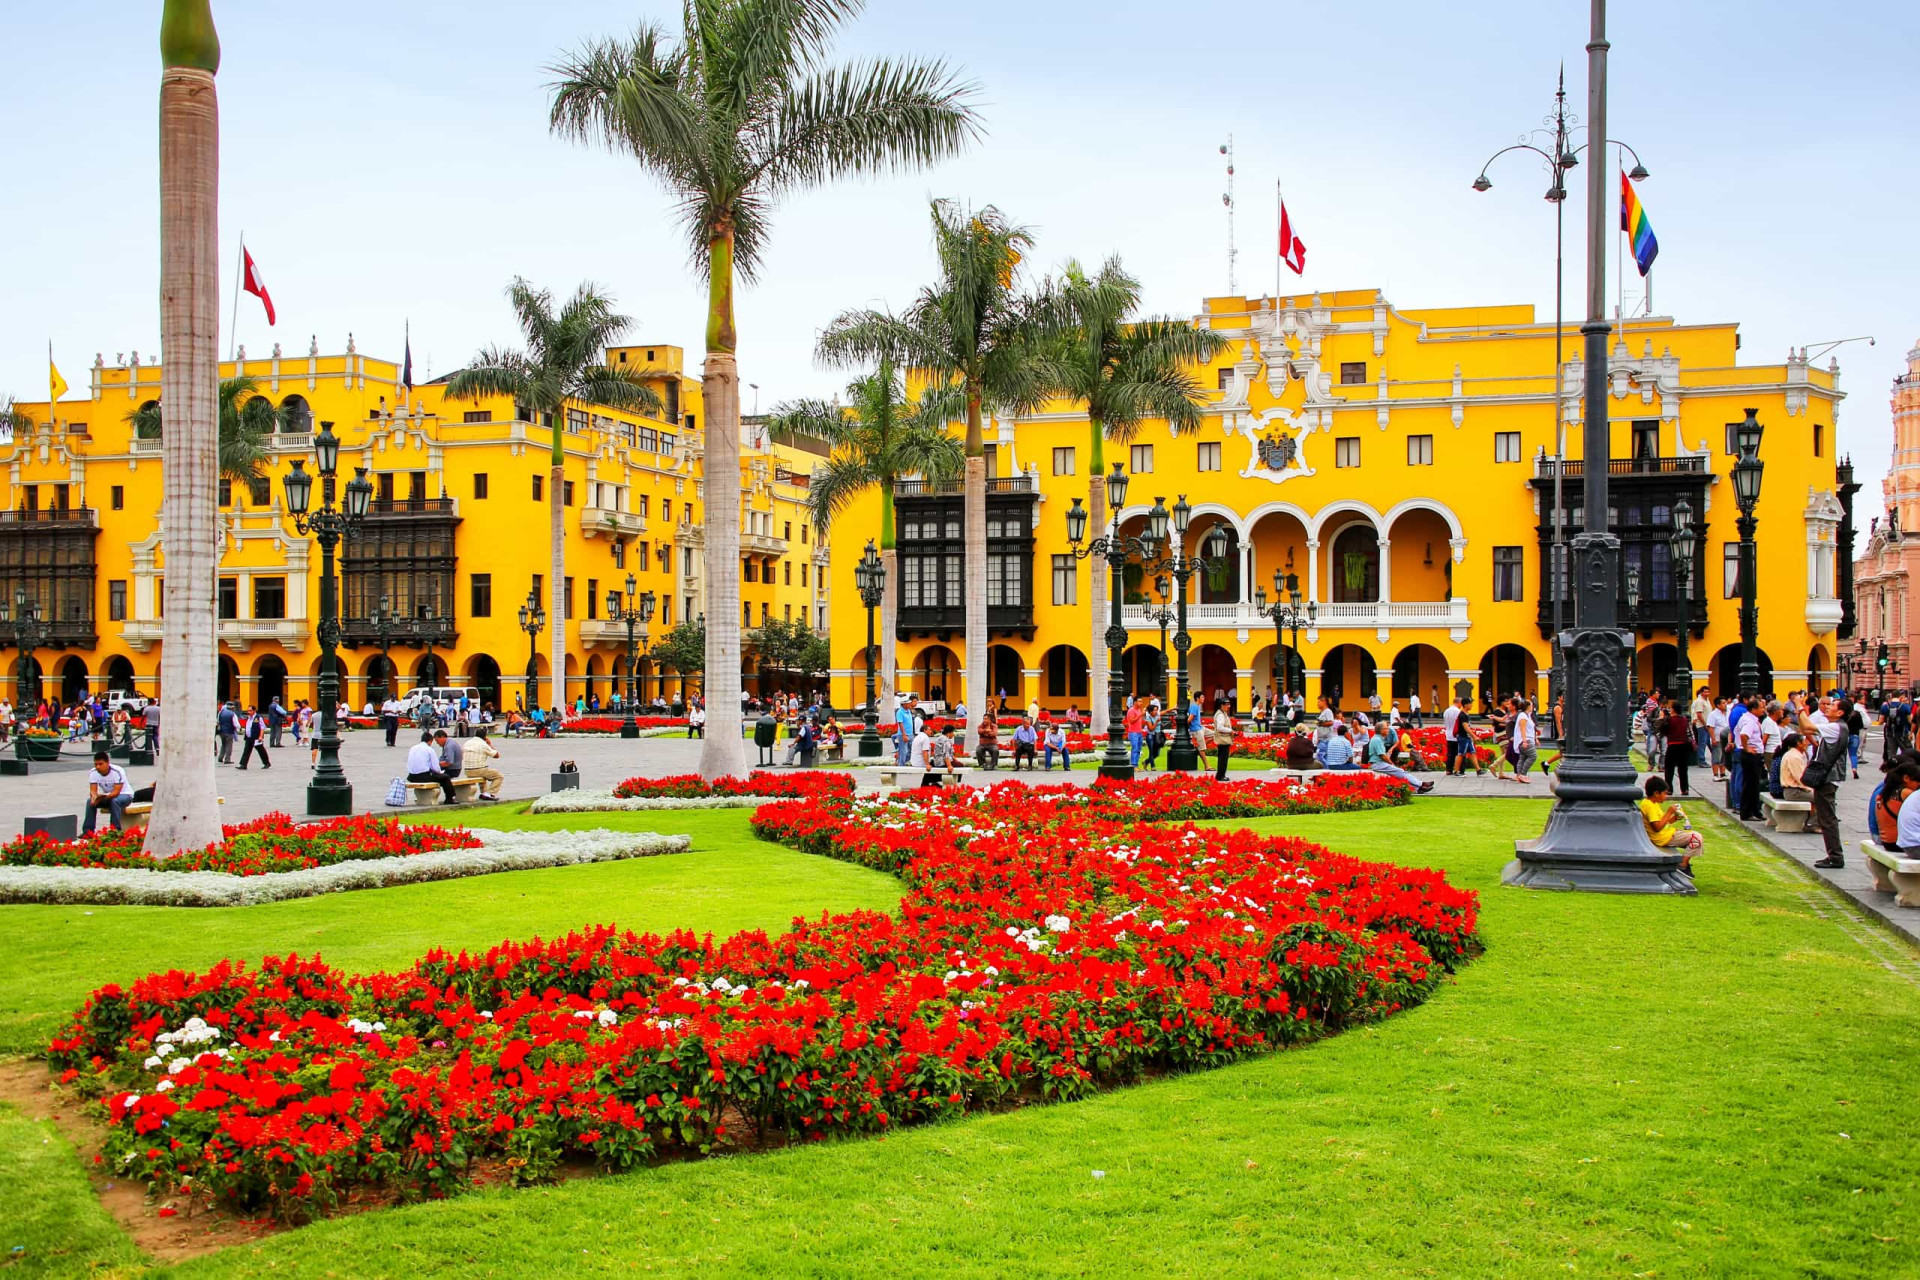 Location: Lima<br>Criteria: Cultural<br>Year established: 1988<br>Description: The Archbishop Palace, Goyeneche House, and the Basílica Cathedral are just three of the outstanding buildings that distinguish the Peruvian capital's historic center.<p>You may also like:<a href="https://www.starsinsider.com/n/453395?utm_source=msn.com&utm_medium=display&utm_campaign=referral_description&utm_content=413555v12en-us"> What Christmas was like in Victorian times</a></p>